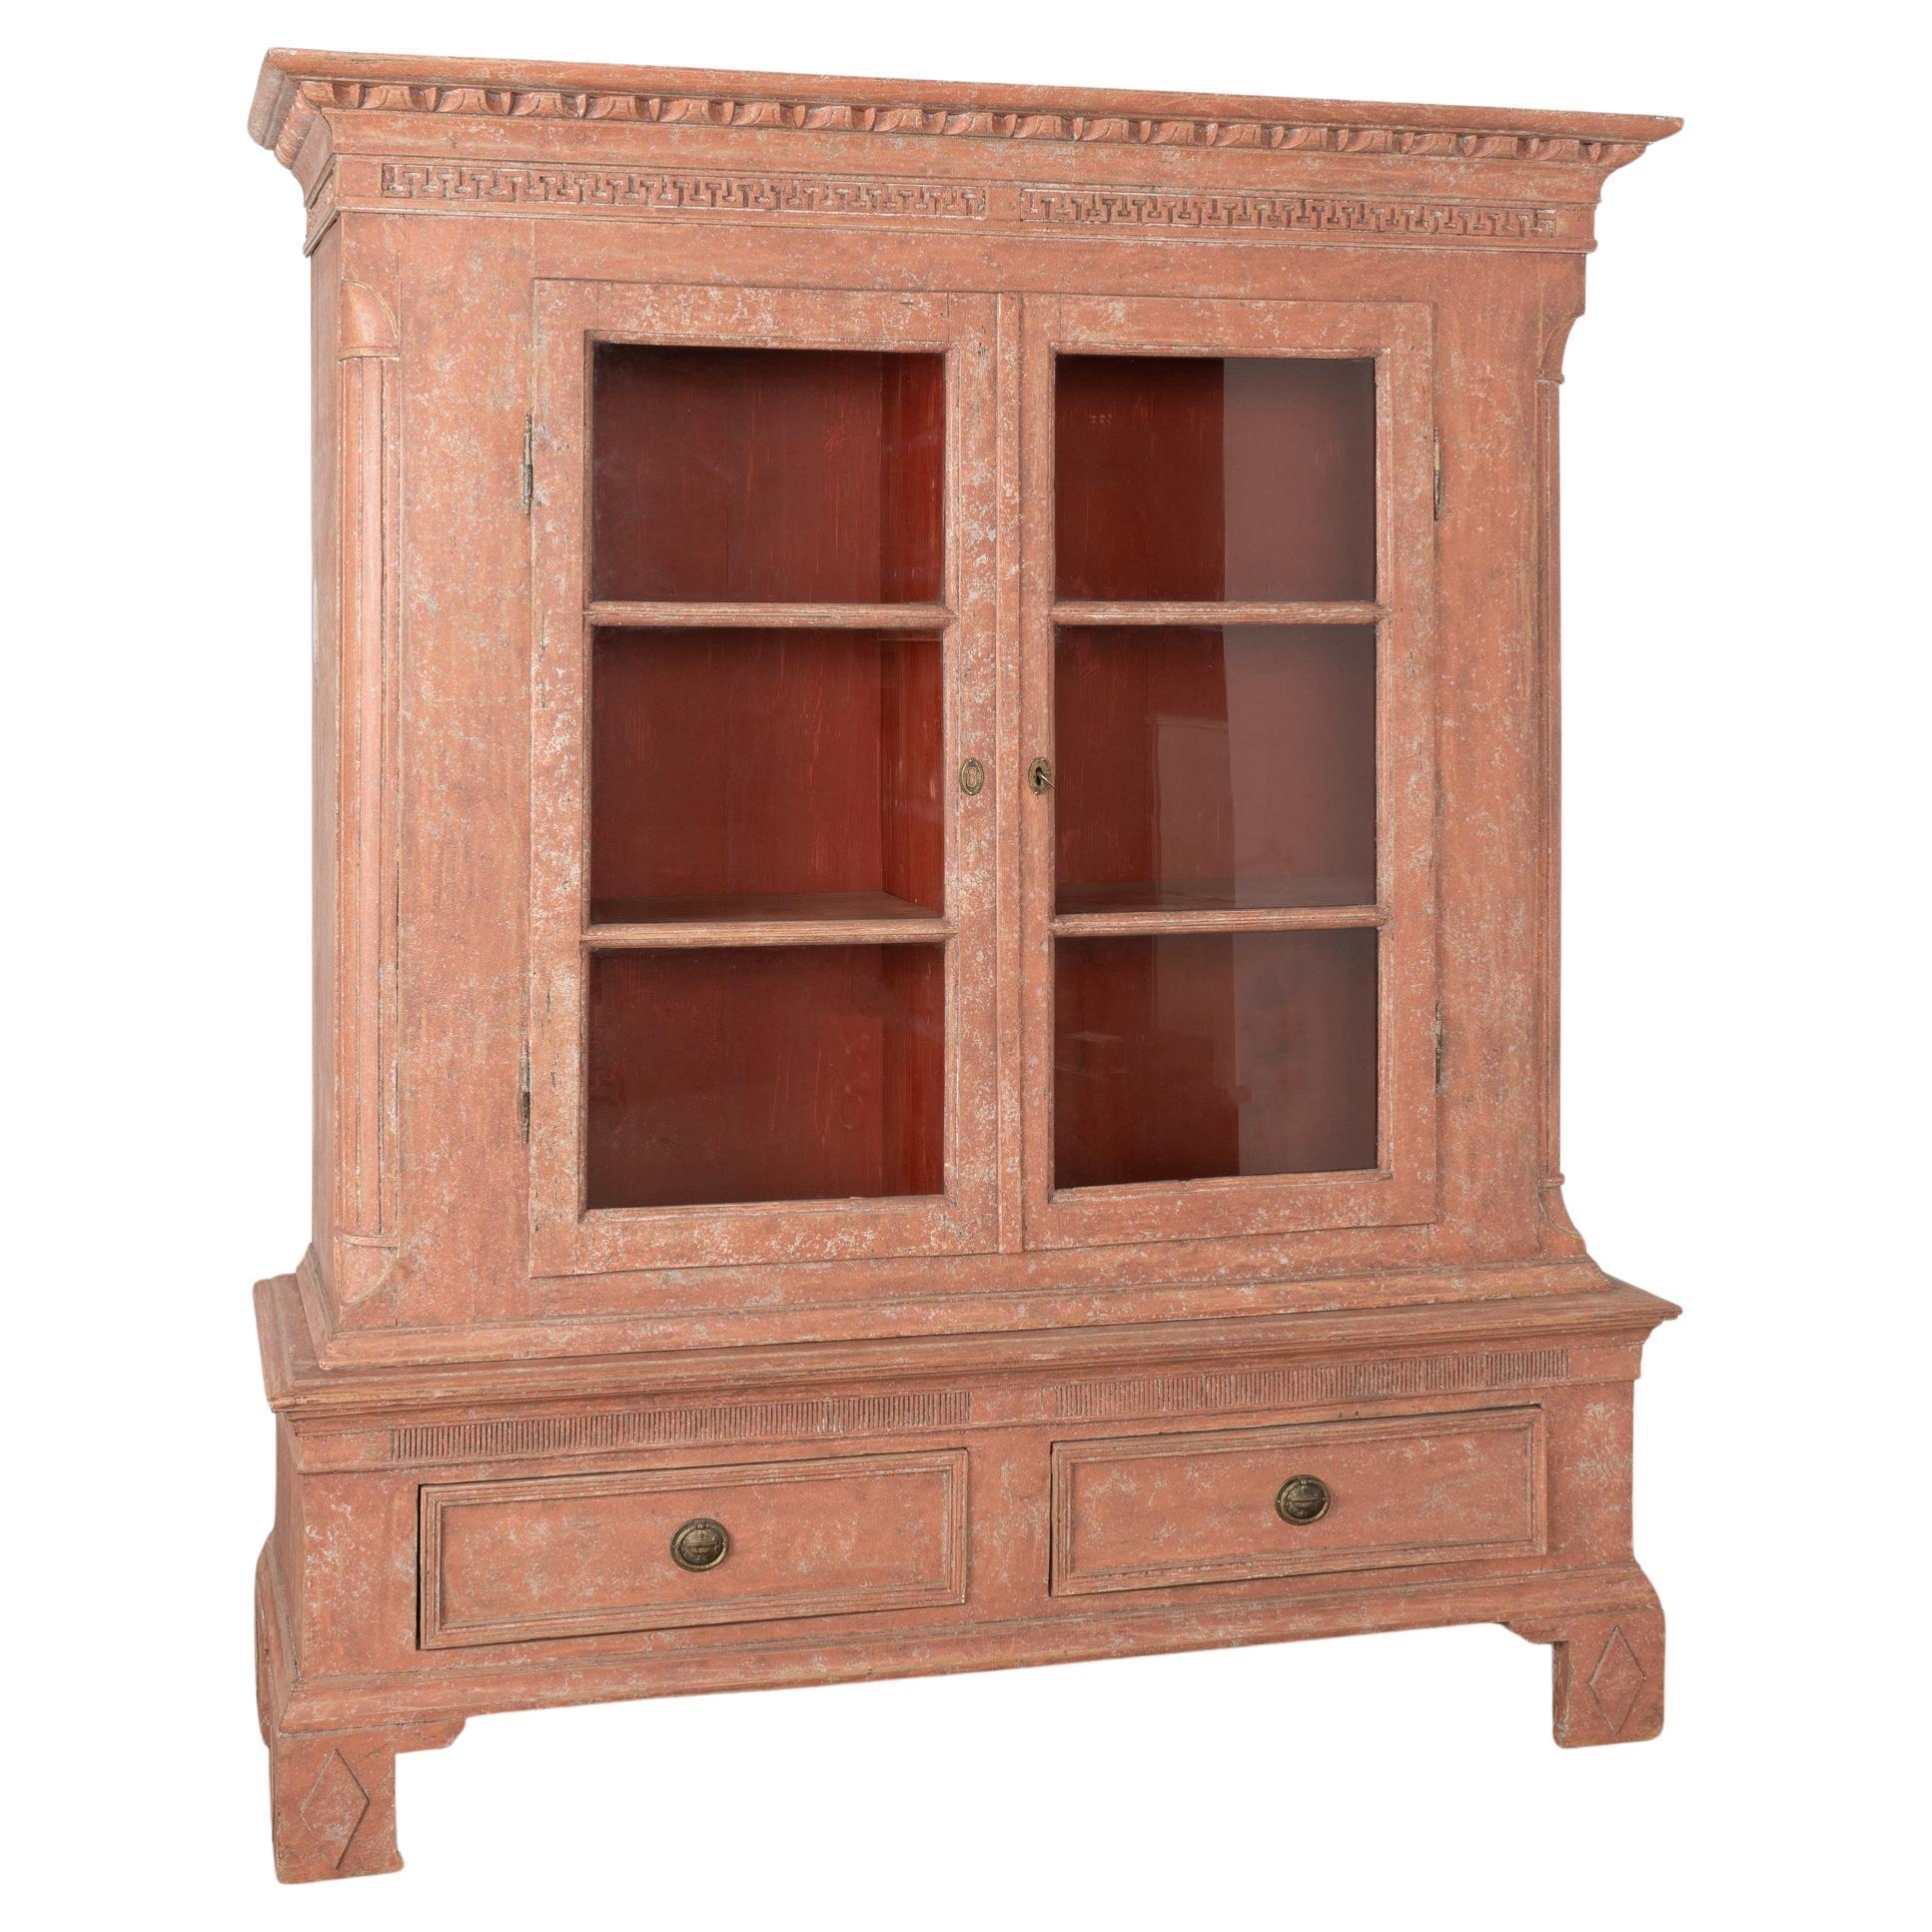 Red Painted Gustavian Bookcase Display Cabinet, Sweden circa 1790-1820